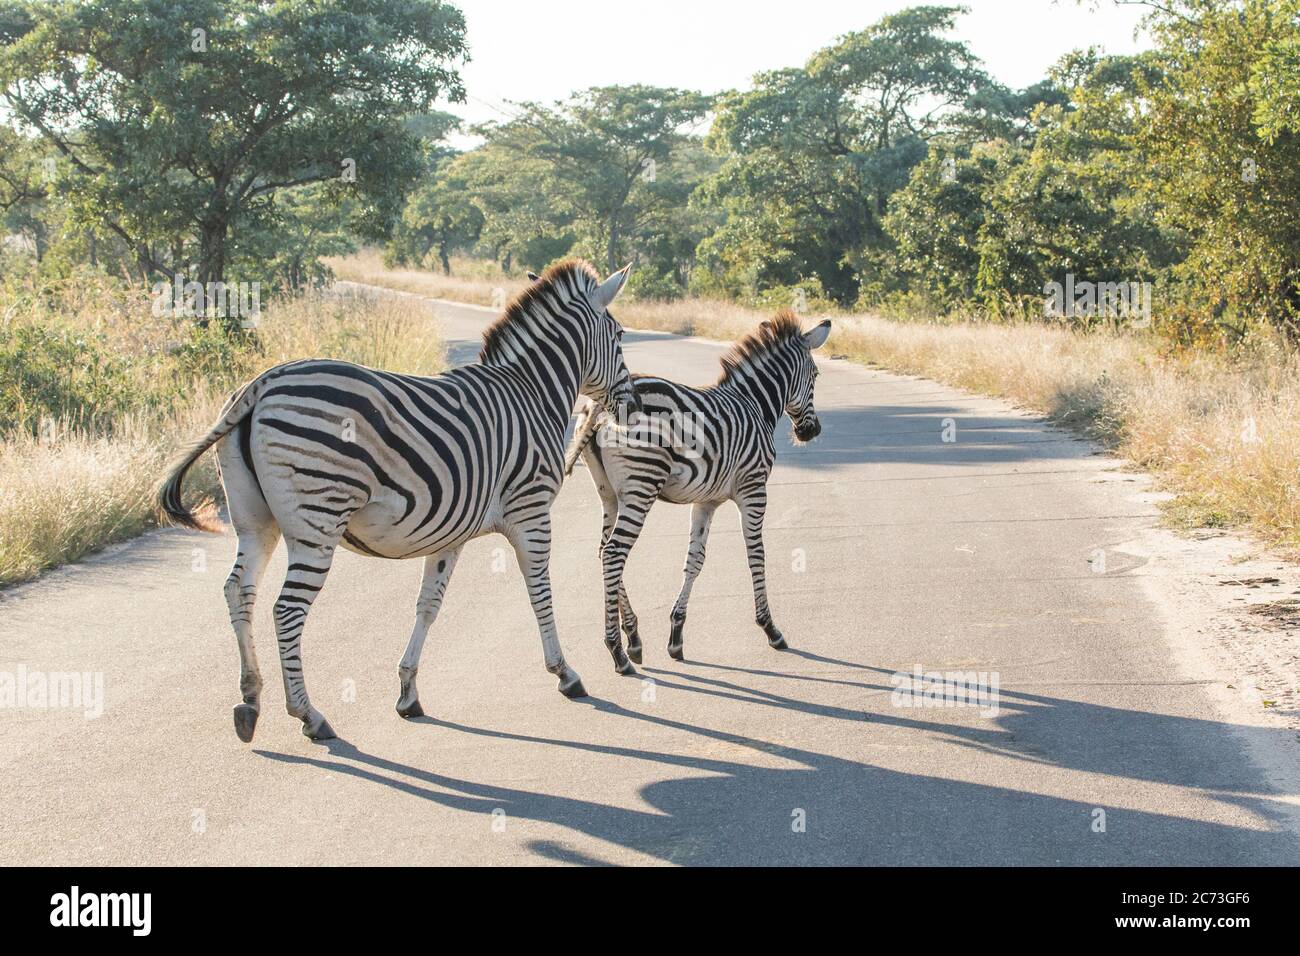 Zebras crossing the road, mother and foal, Kruger National Park, Mpumalanga Province, South Africa, Africa Stock Photo